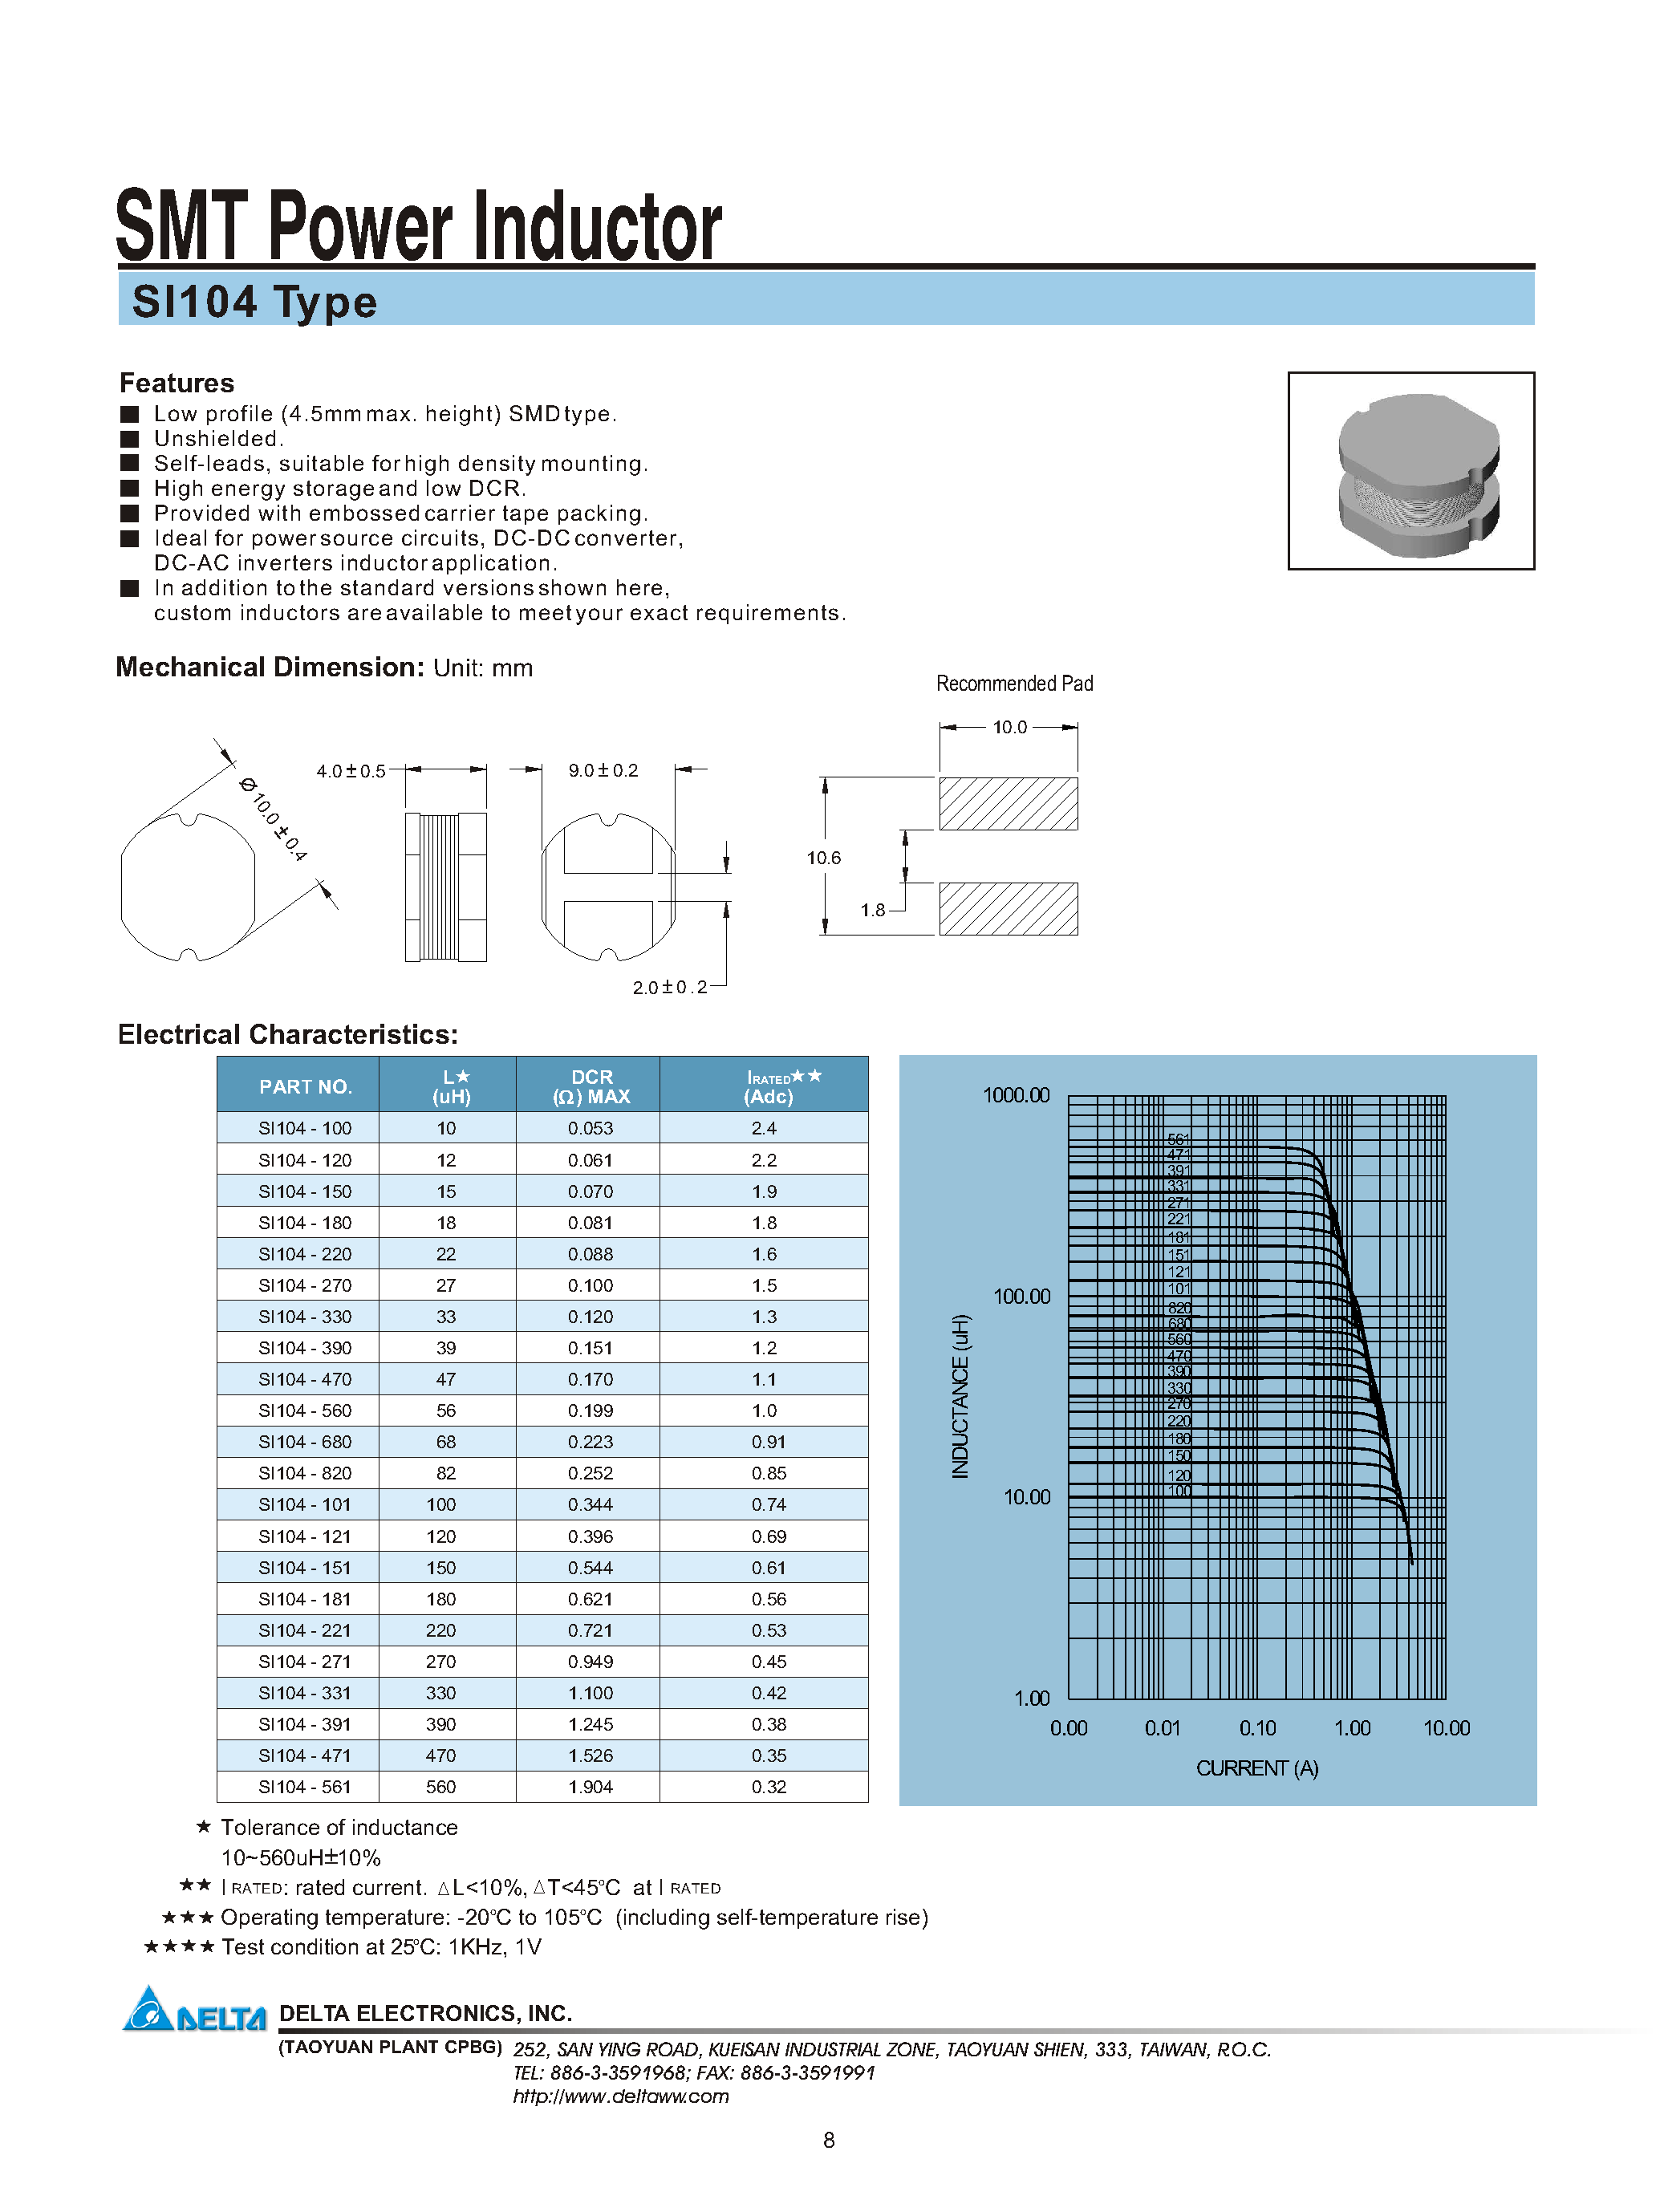 Datasheet SI104-181 - SMT Power Inductor page 1